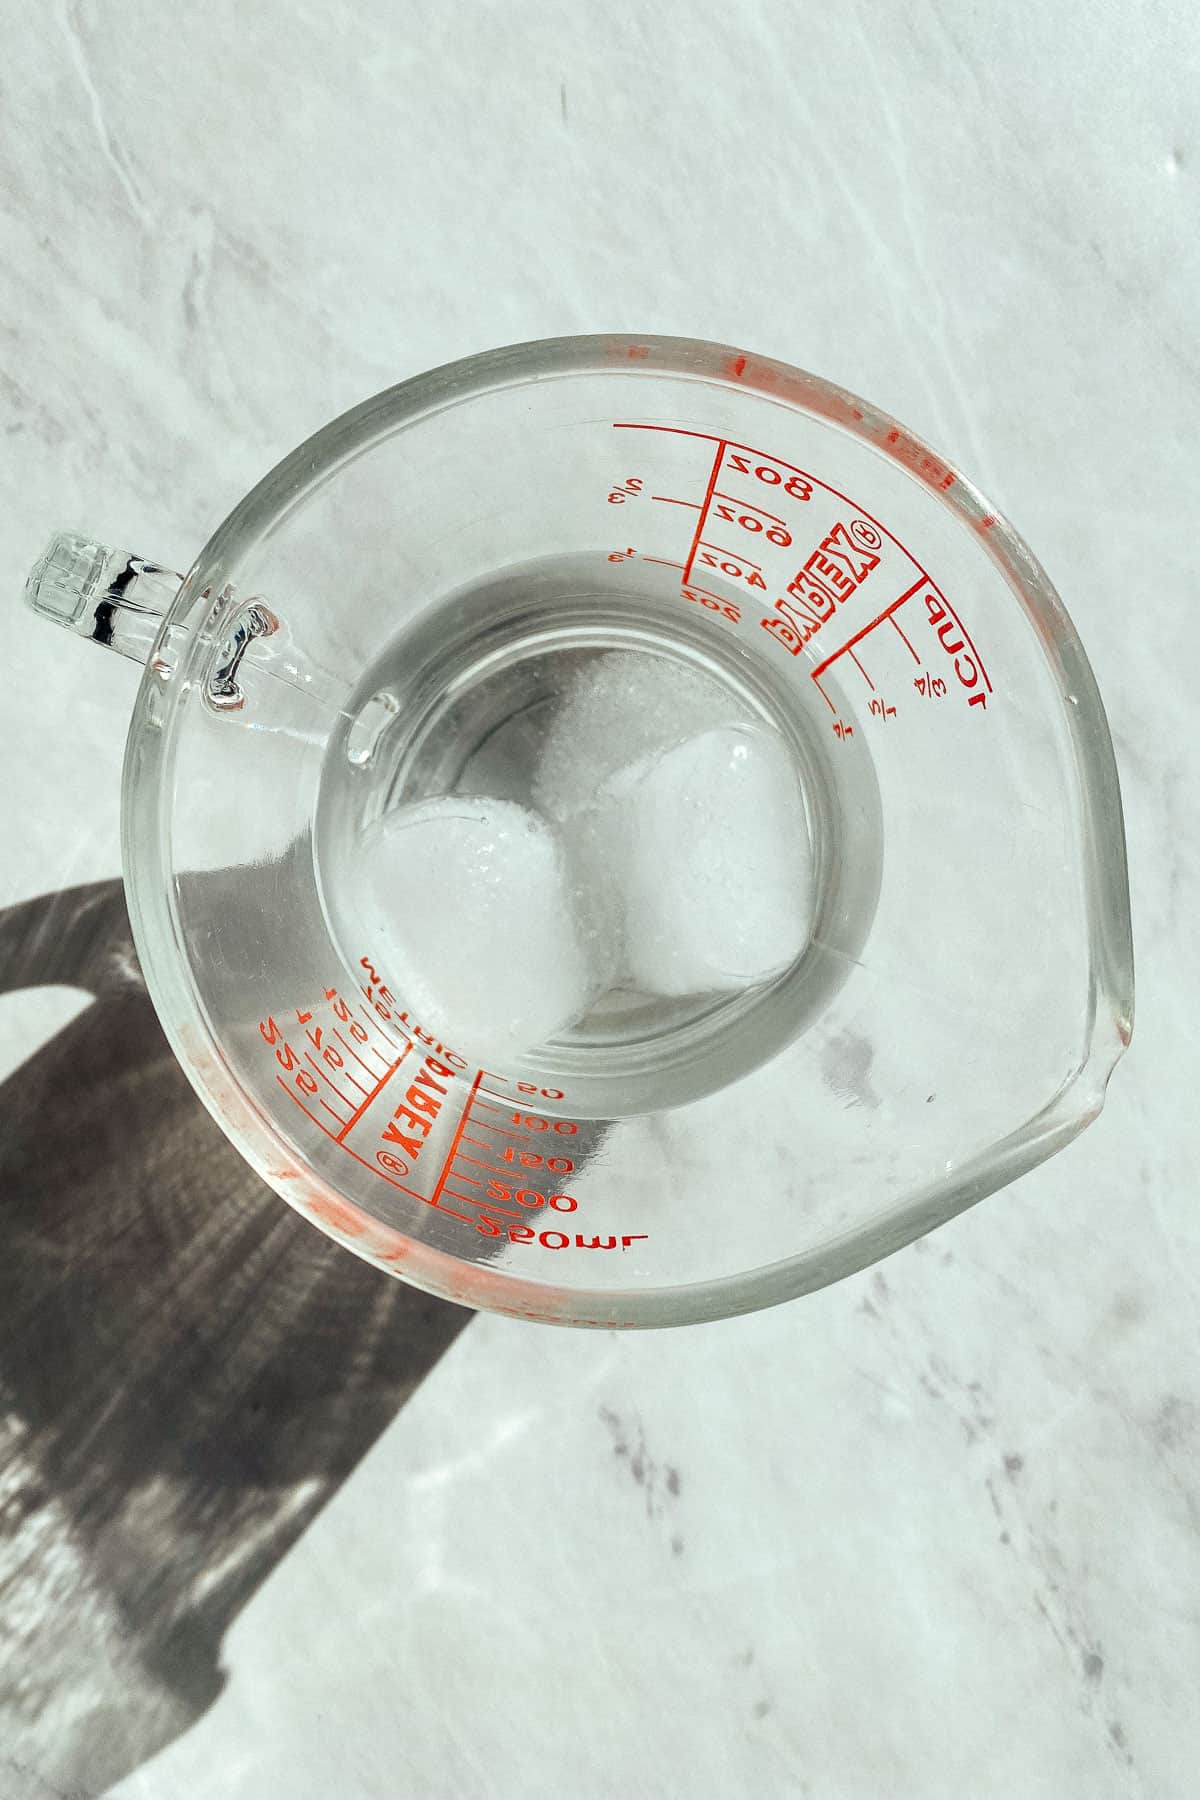 icy water and salt in a measuring cup